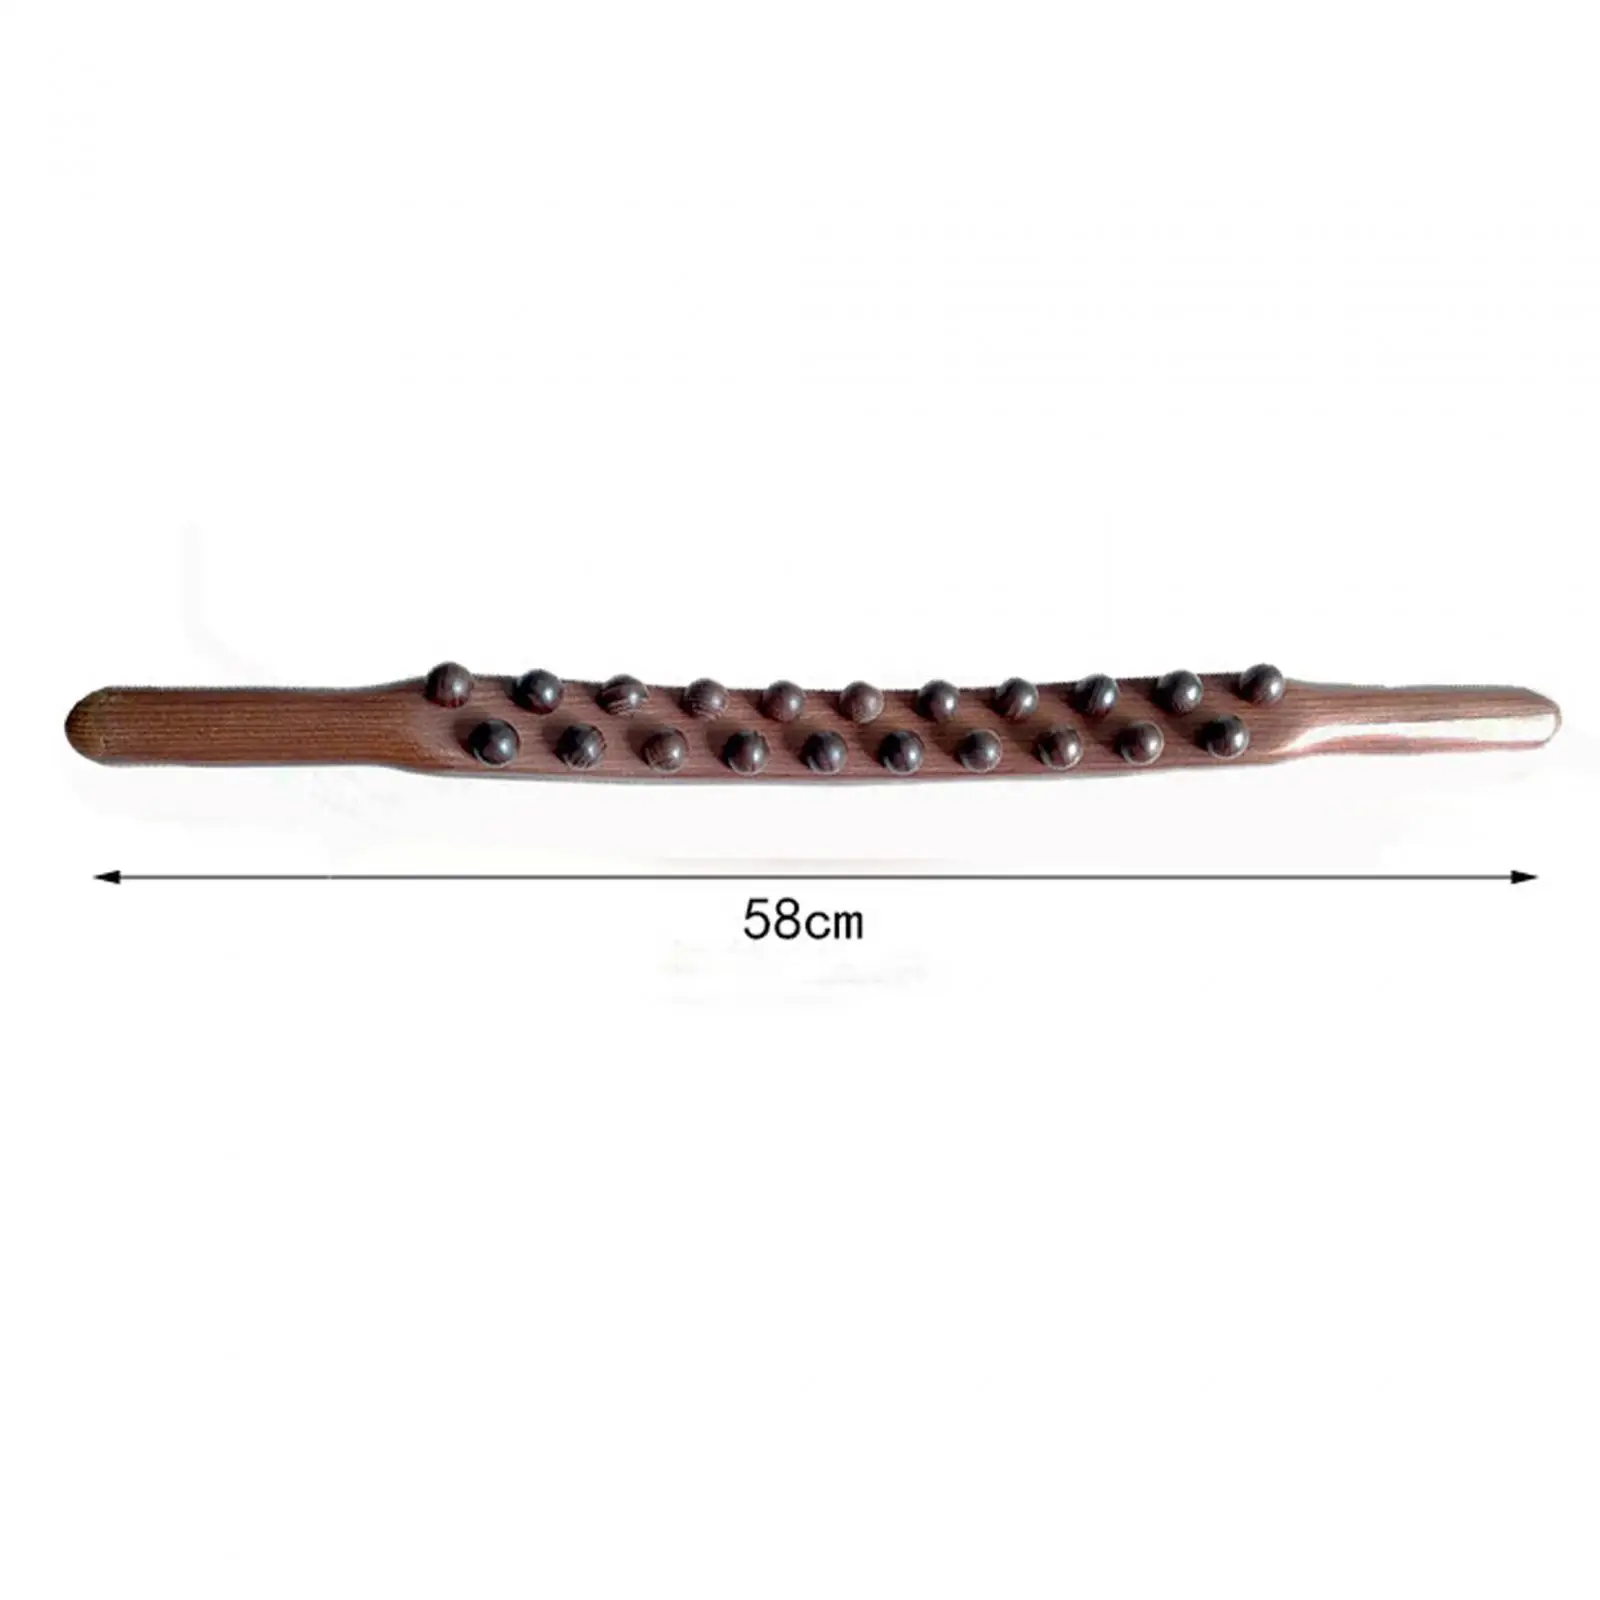 

Wood Guasha Scraping Rod Massage Tool Length 58cm Massage and Relaxing 21 Beads Point for Legs